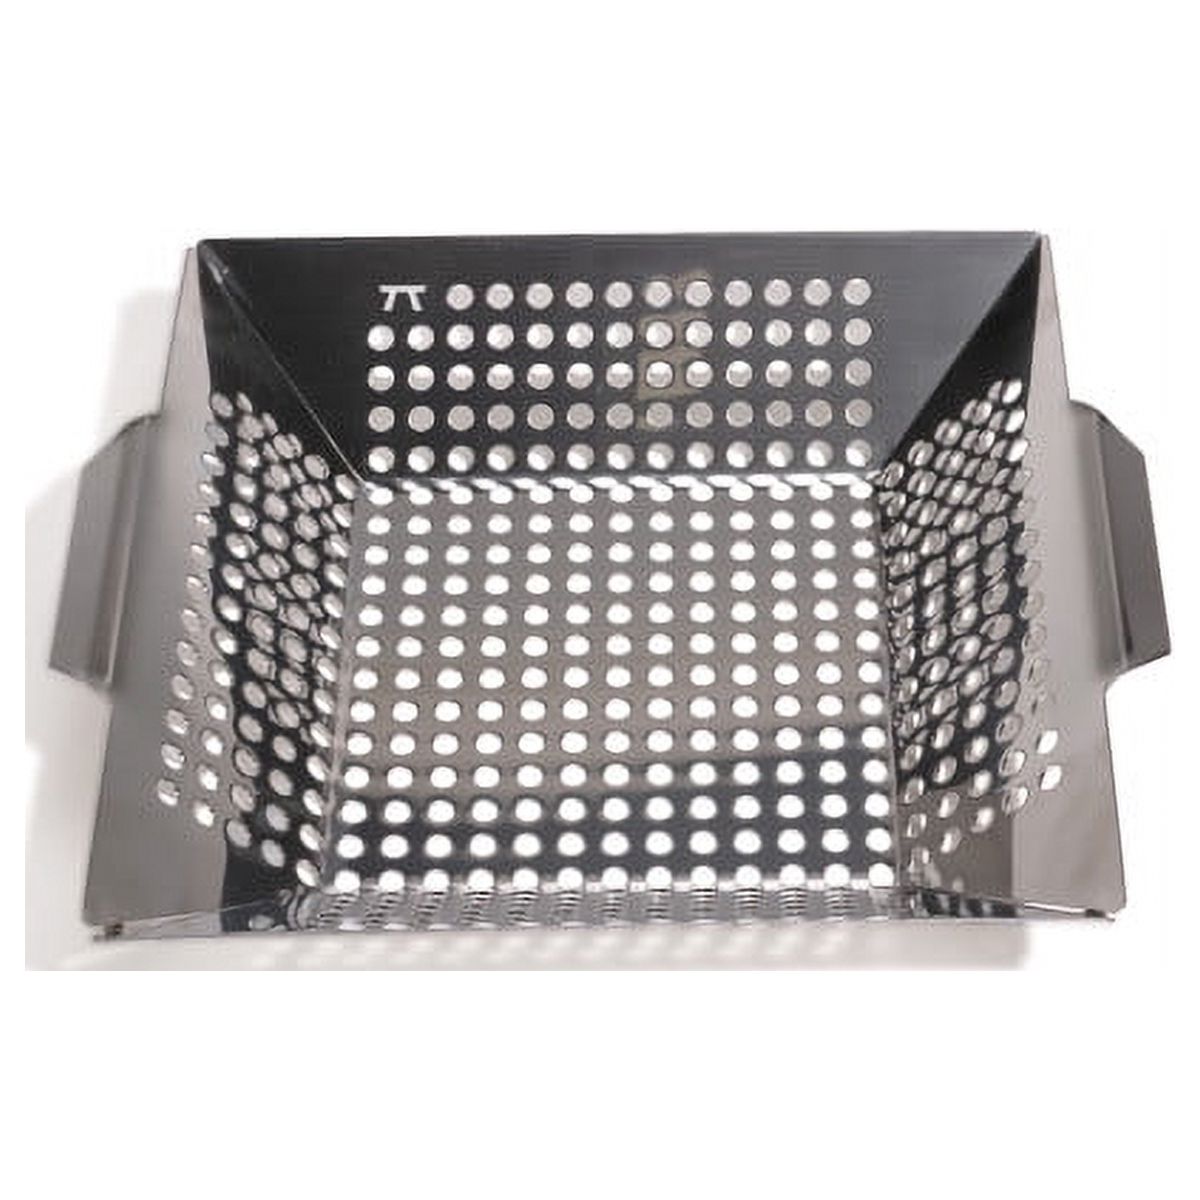 Outset Square Grill Wok, Stainless Steel - image 1 of 2